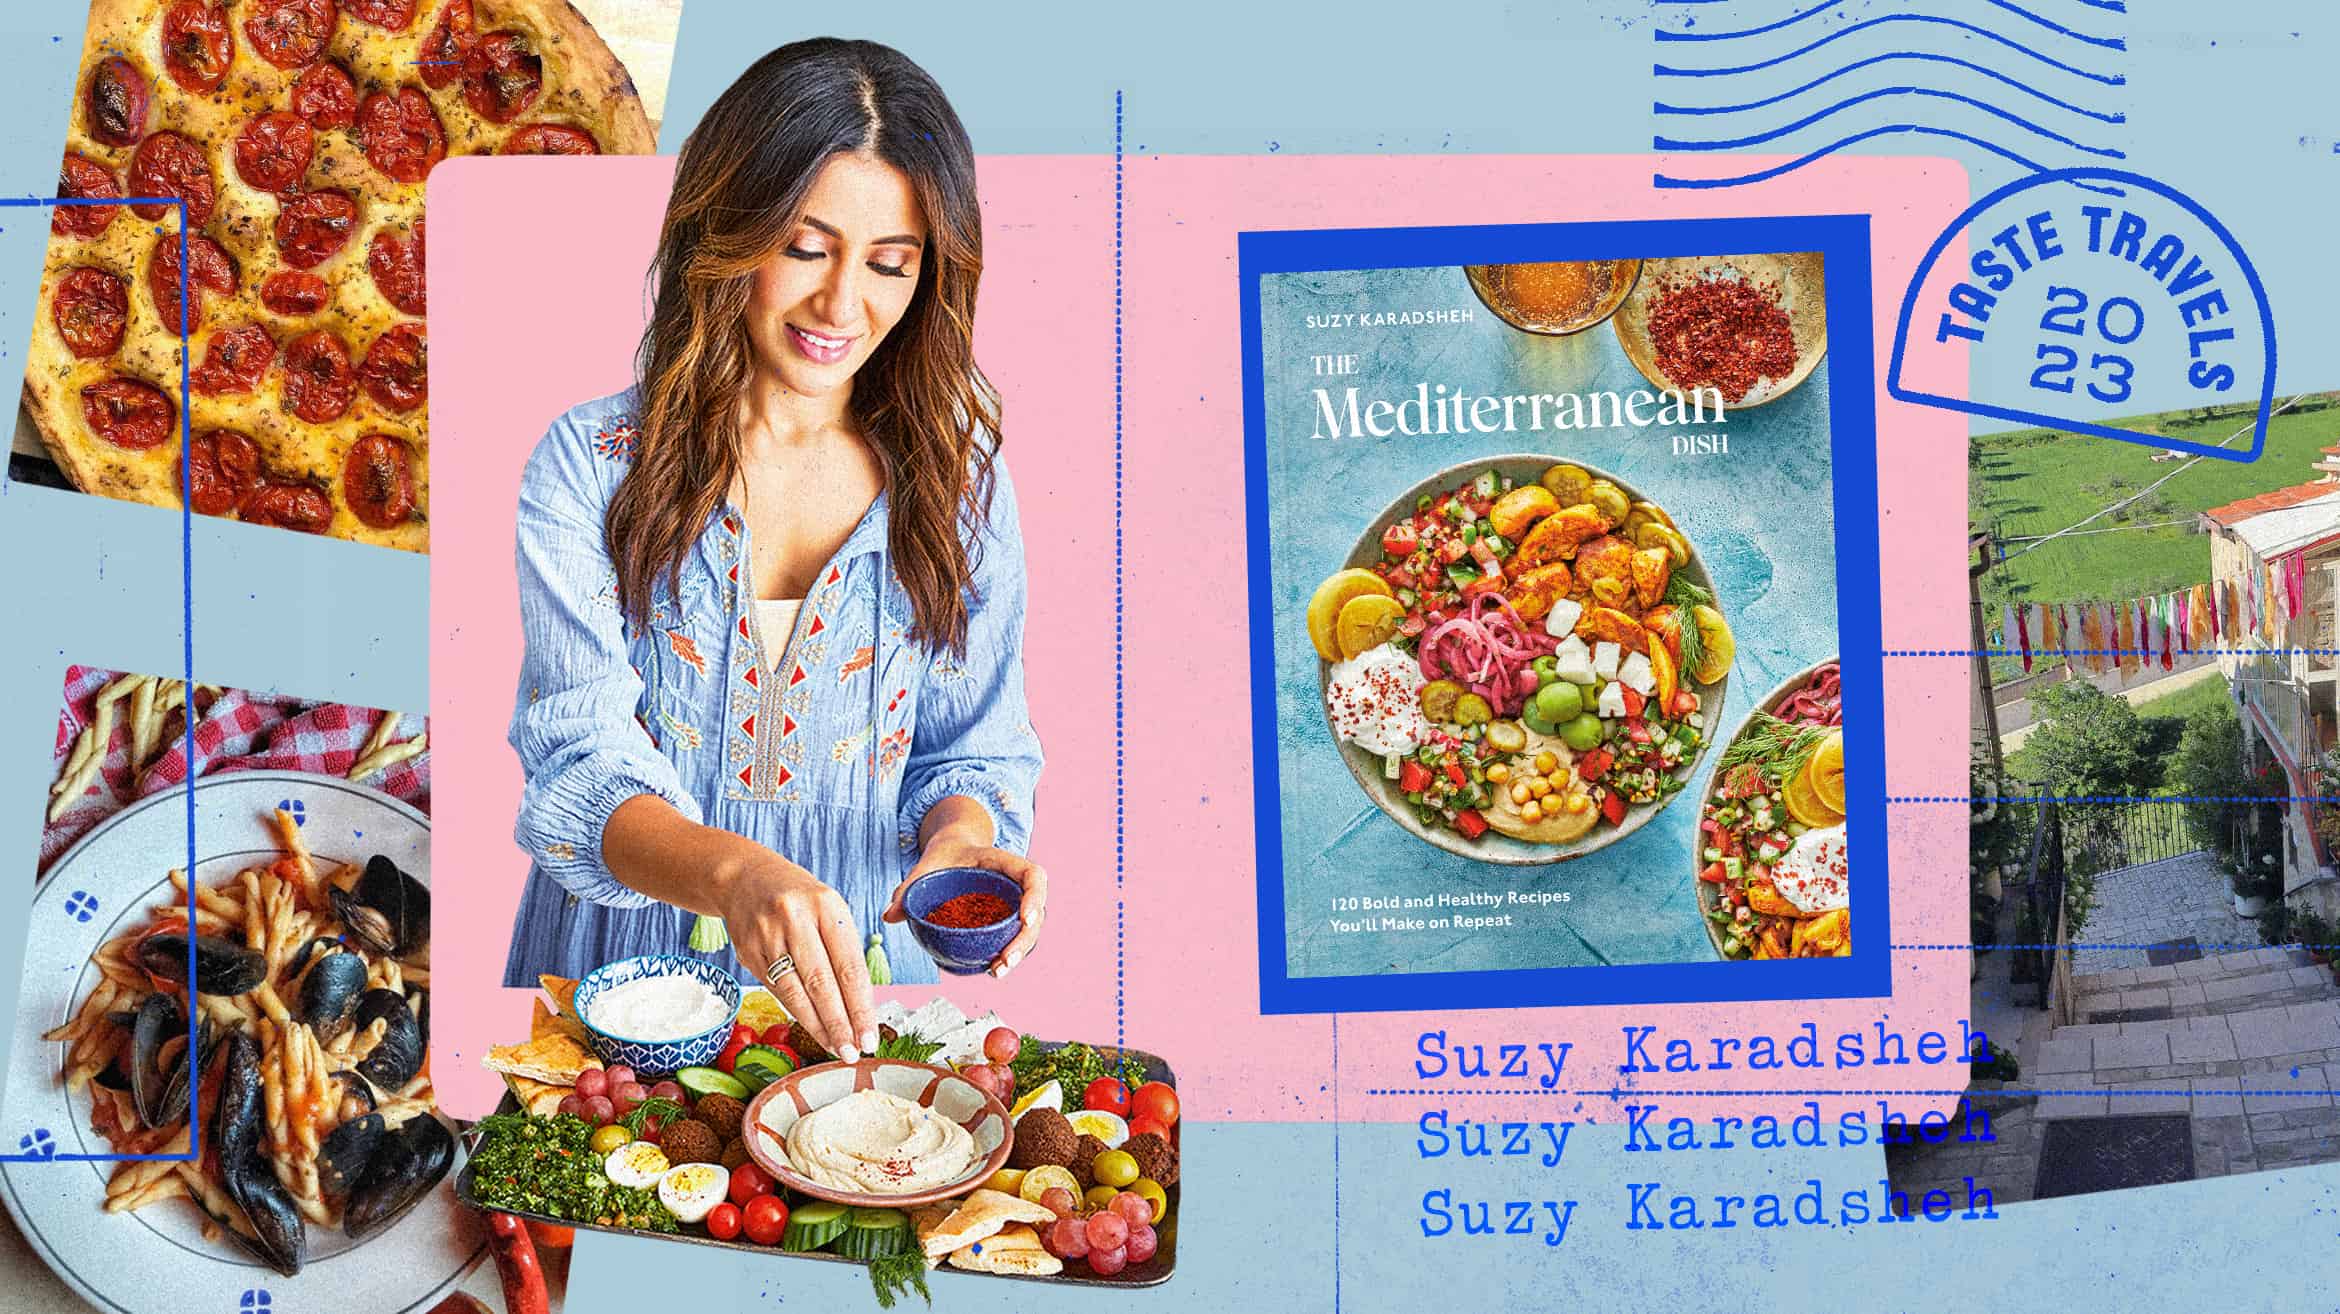 image of Suzy Karadsheh and The Mediterranean Dish Cookbook with Italian food imagery in the background and travel series logo